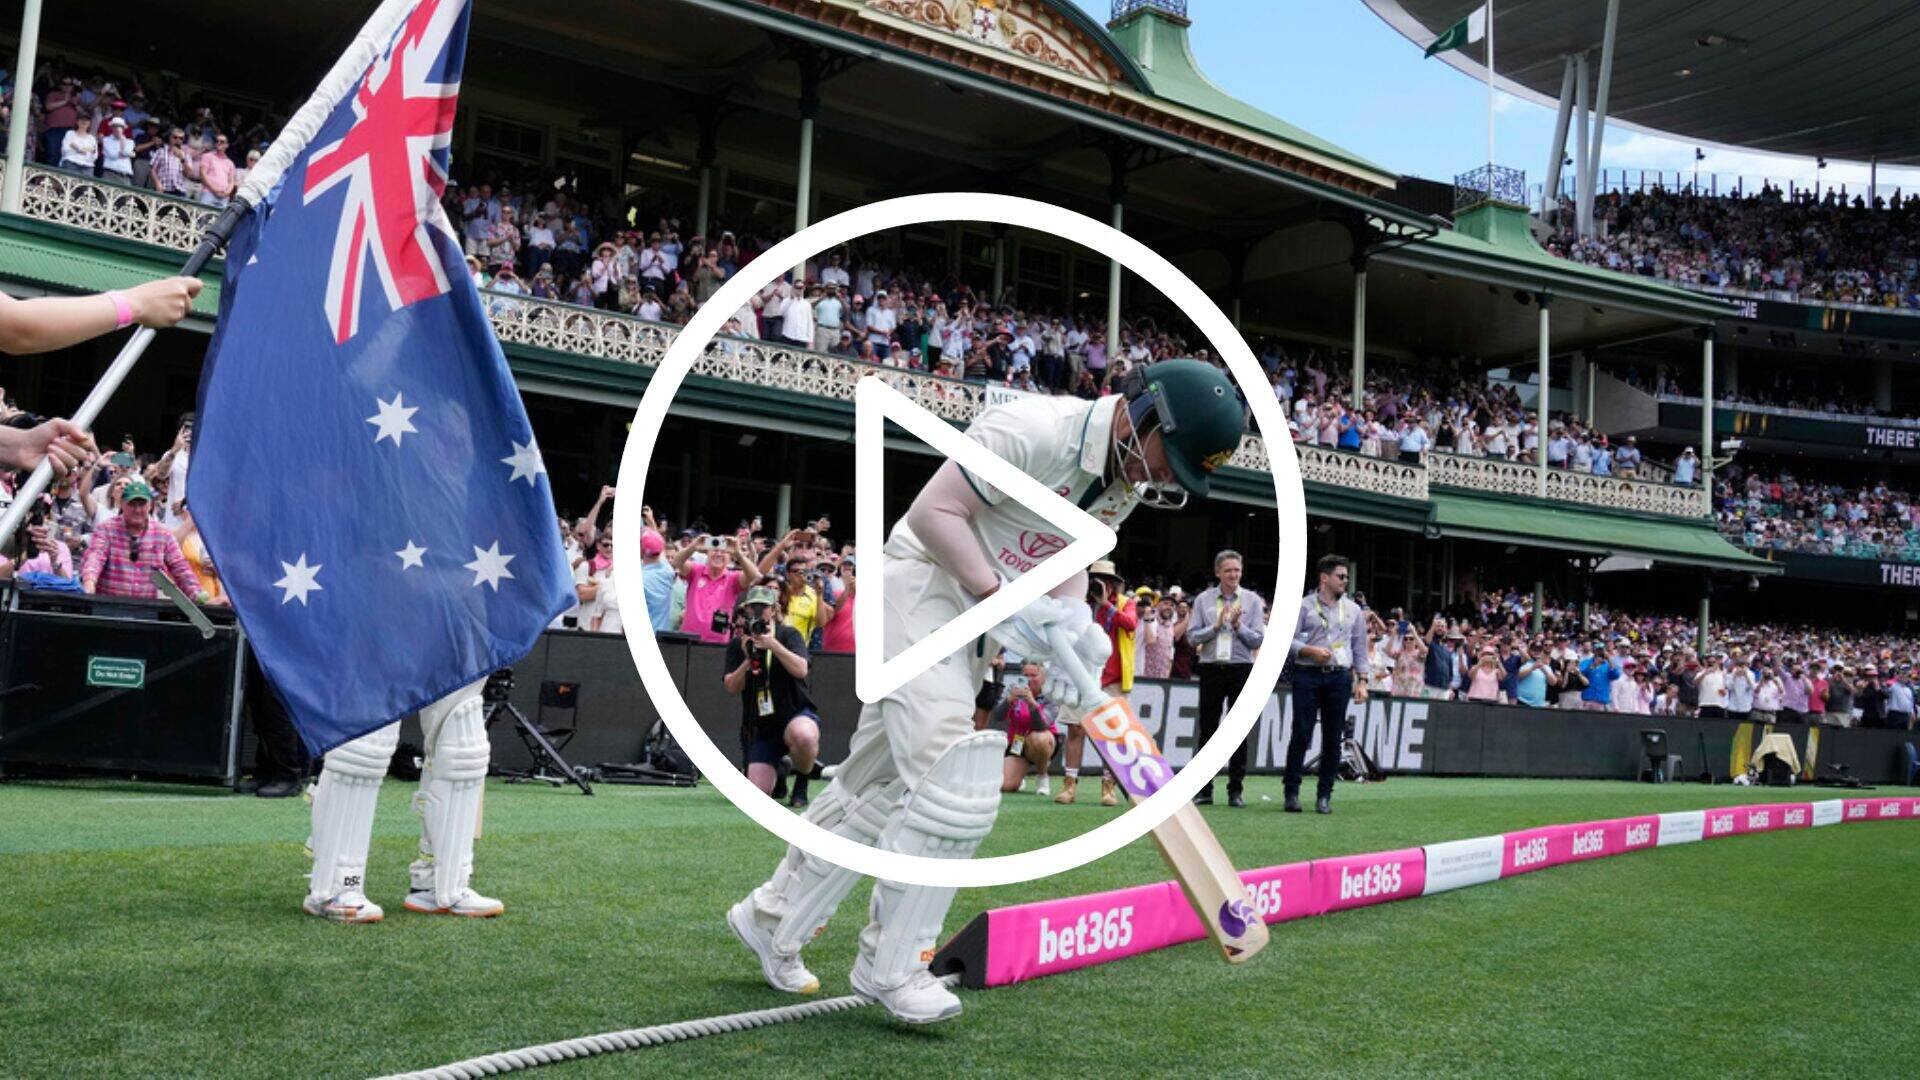 [Watch] 'One Final Time' - David Warner Walks Out To Bat For His Last Test Knock